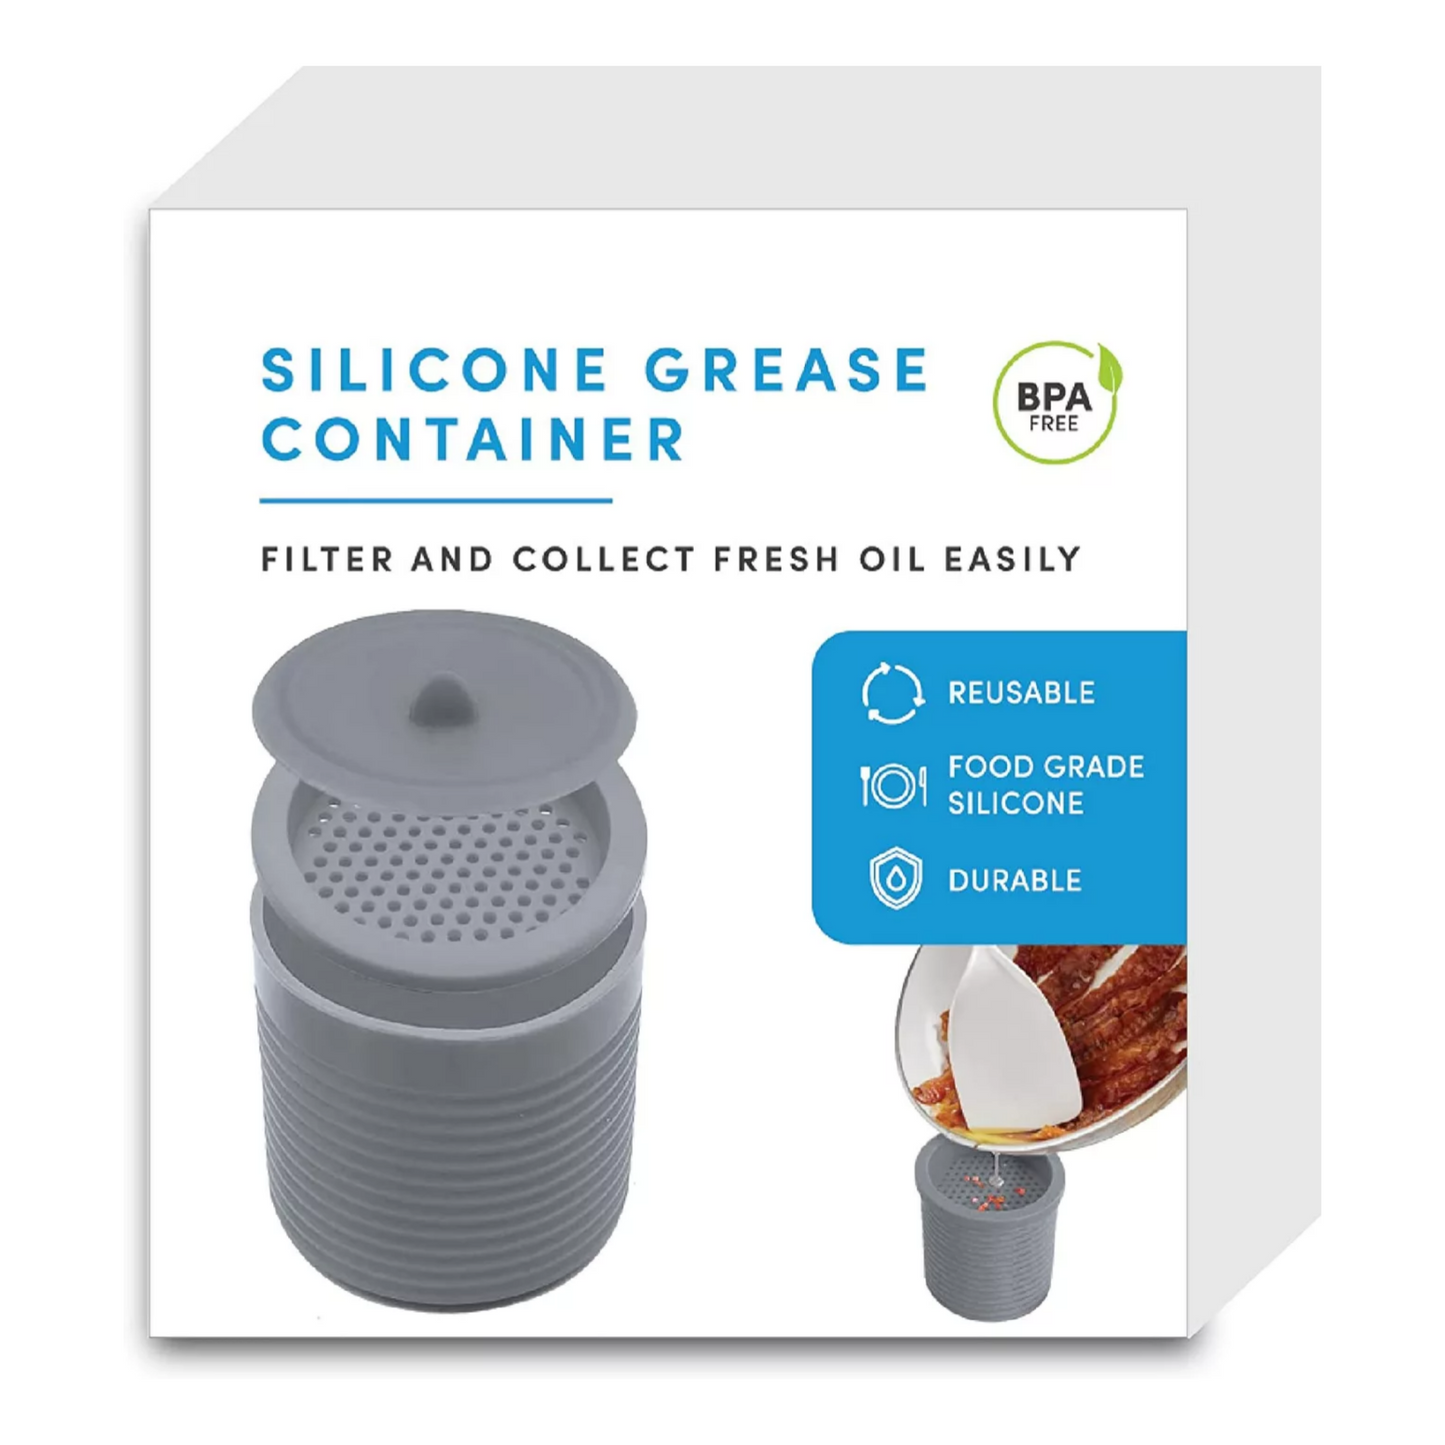 Silicone Grease Container